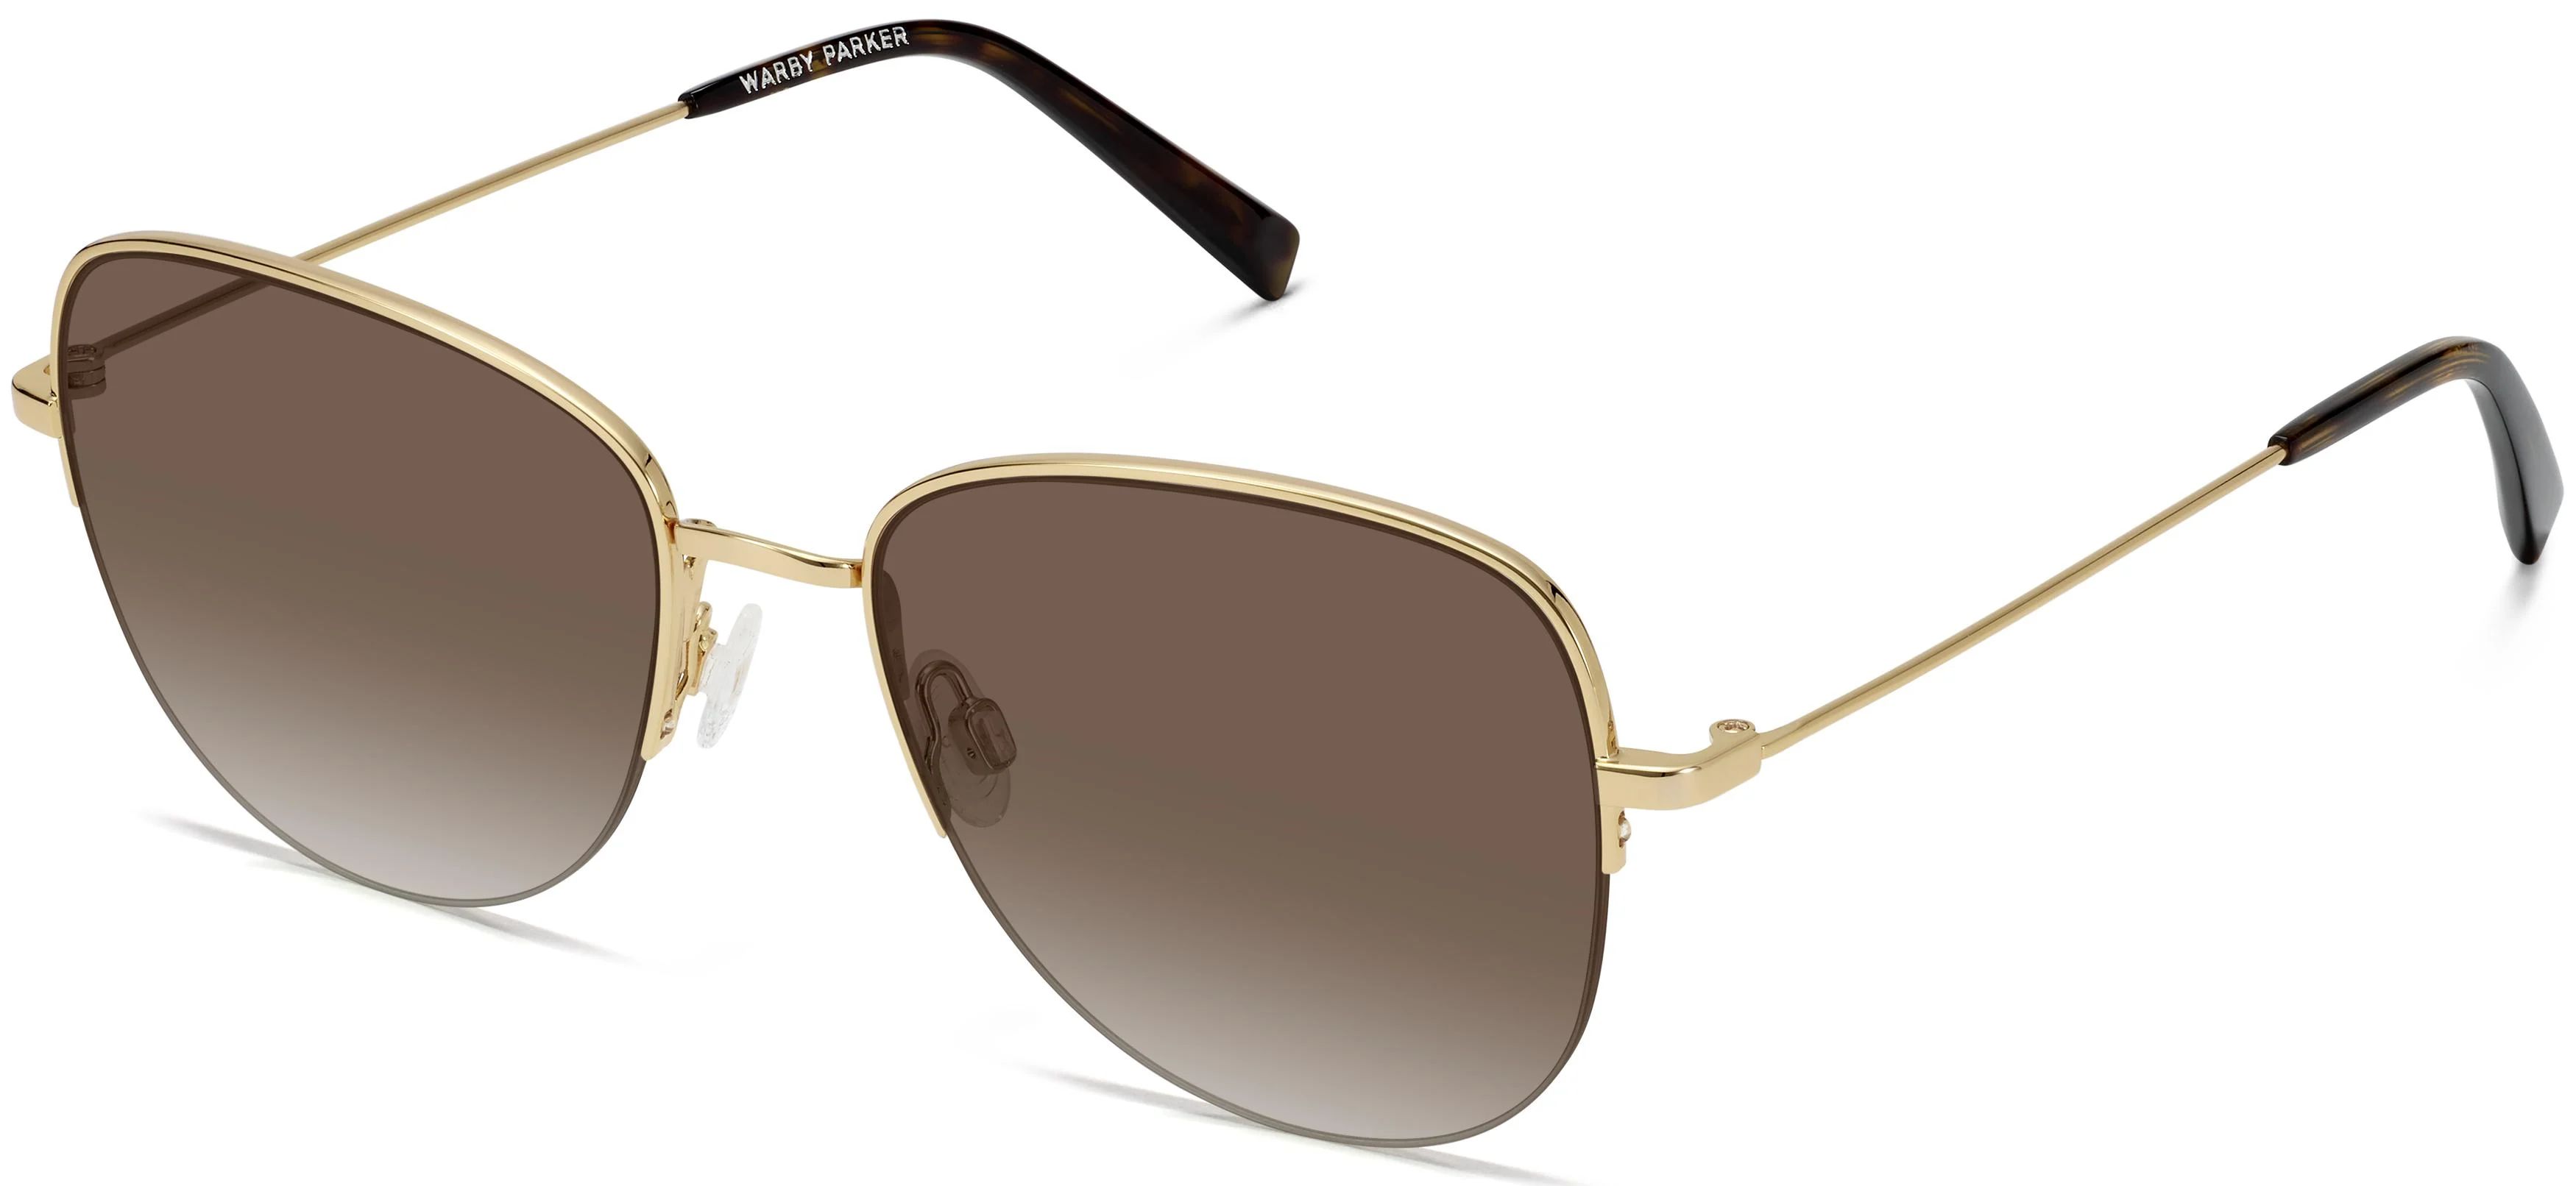 Carlotta Sunglasses in Polished Gold | Warby Parker | Warby Parker (US)